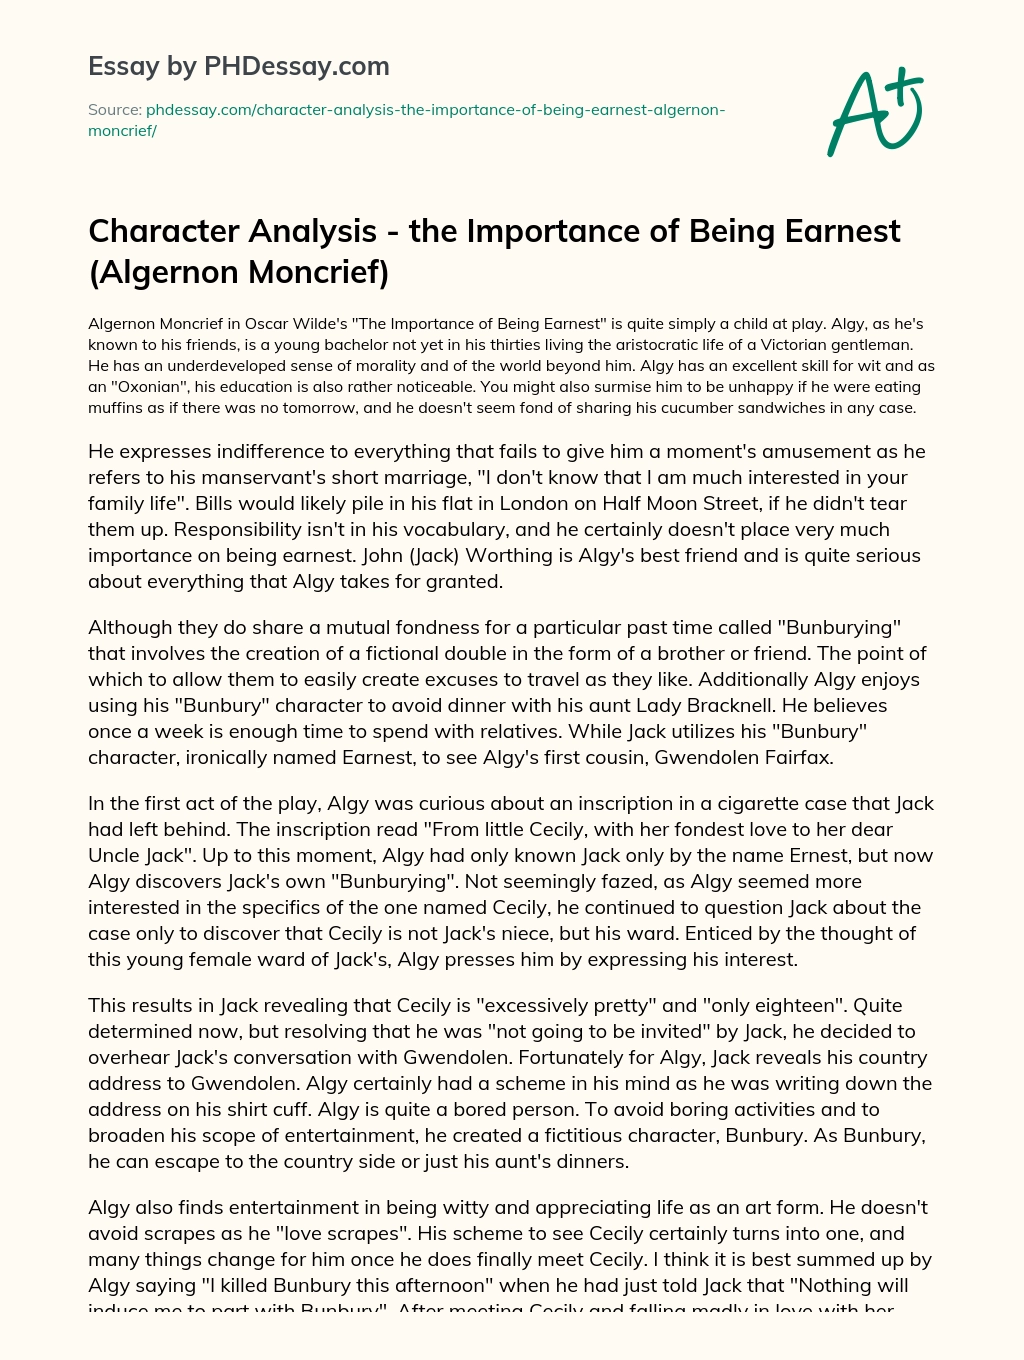 Character analysis – the importance of being earnest (Algernon Moncrief) essay